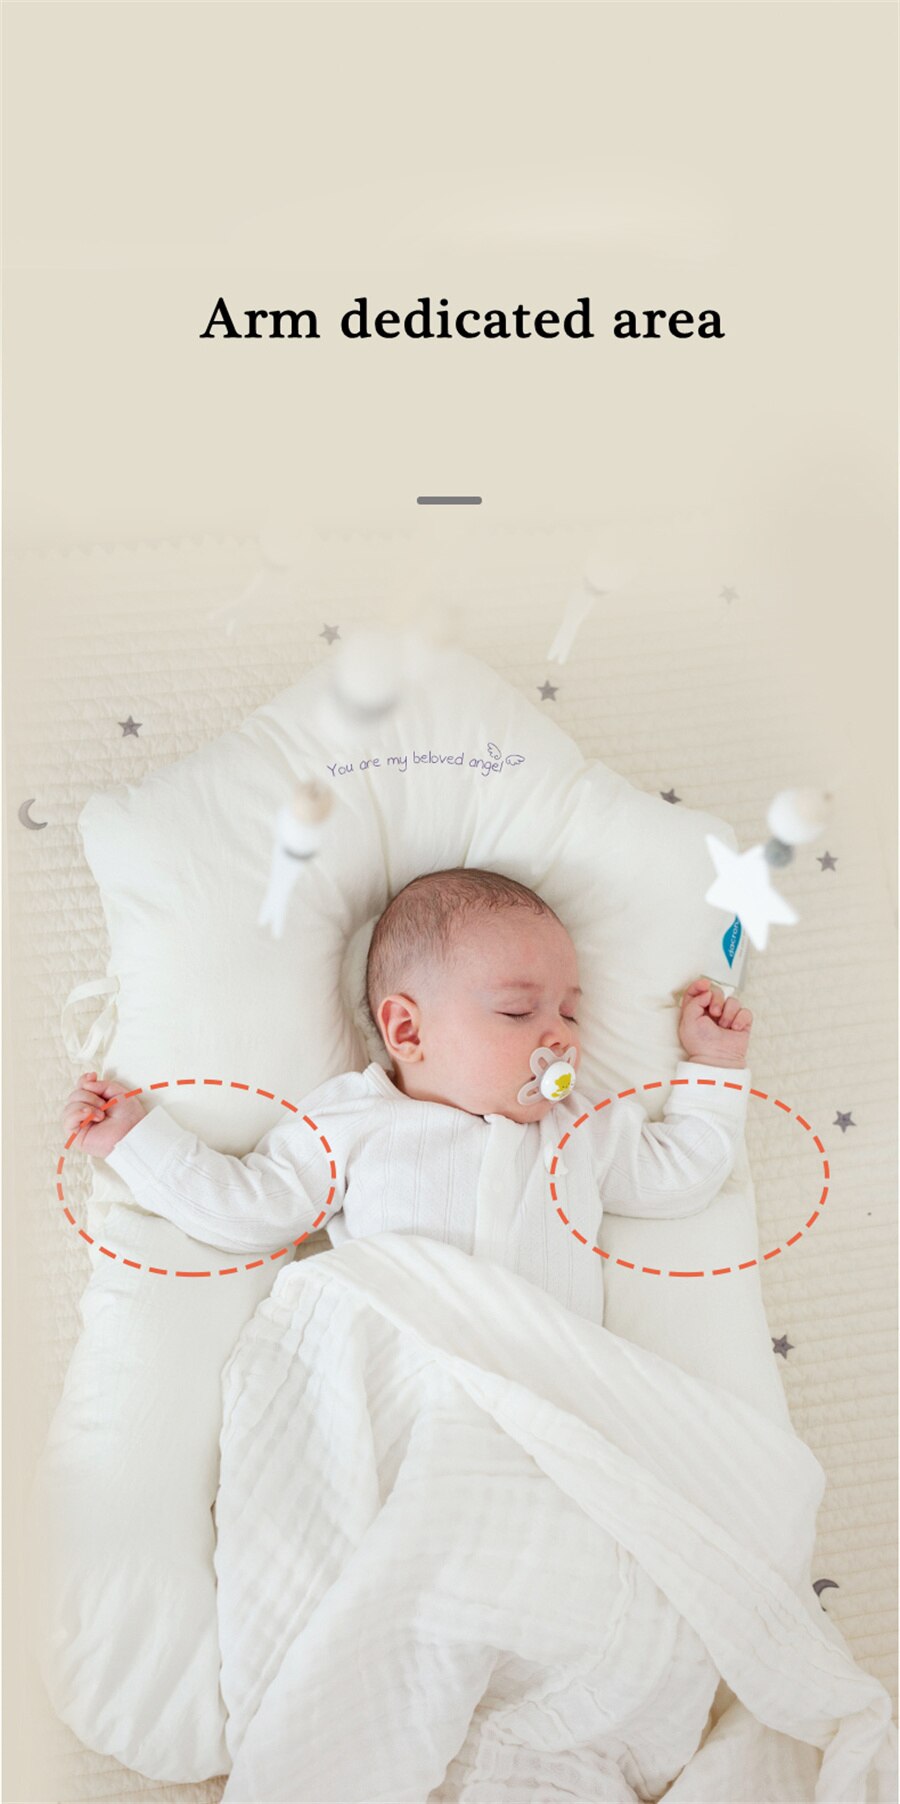 Huggable Baby Pillow Breathable Comfort Sleeping Pillows Protection Newborn 0-12 Months Stuff Baby Bedding Items